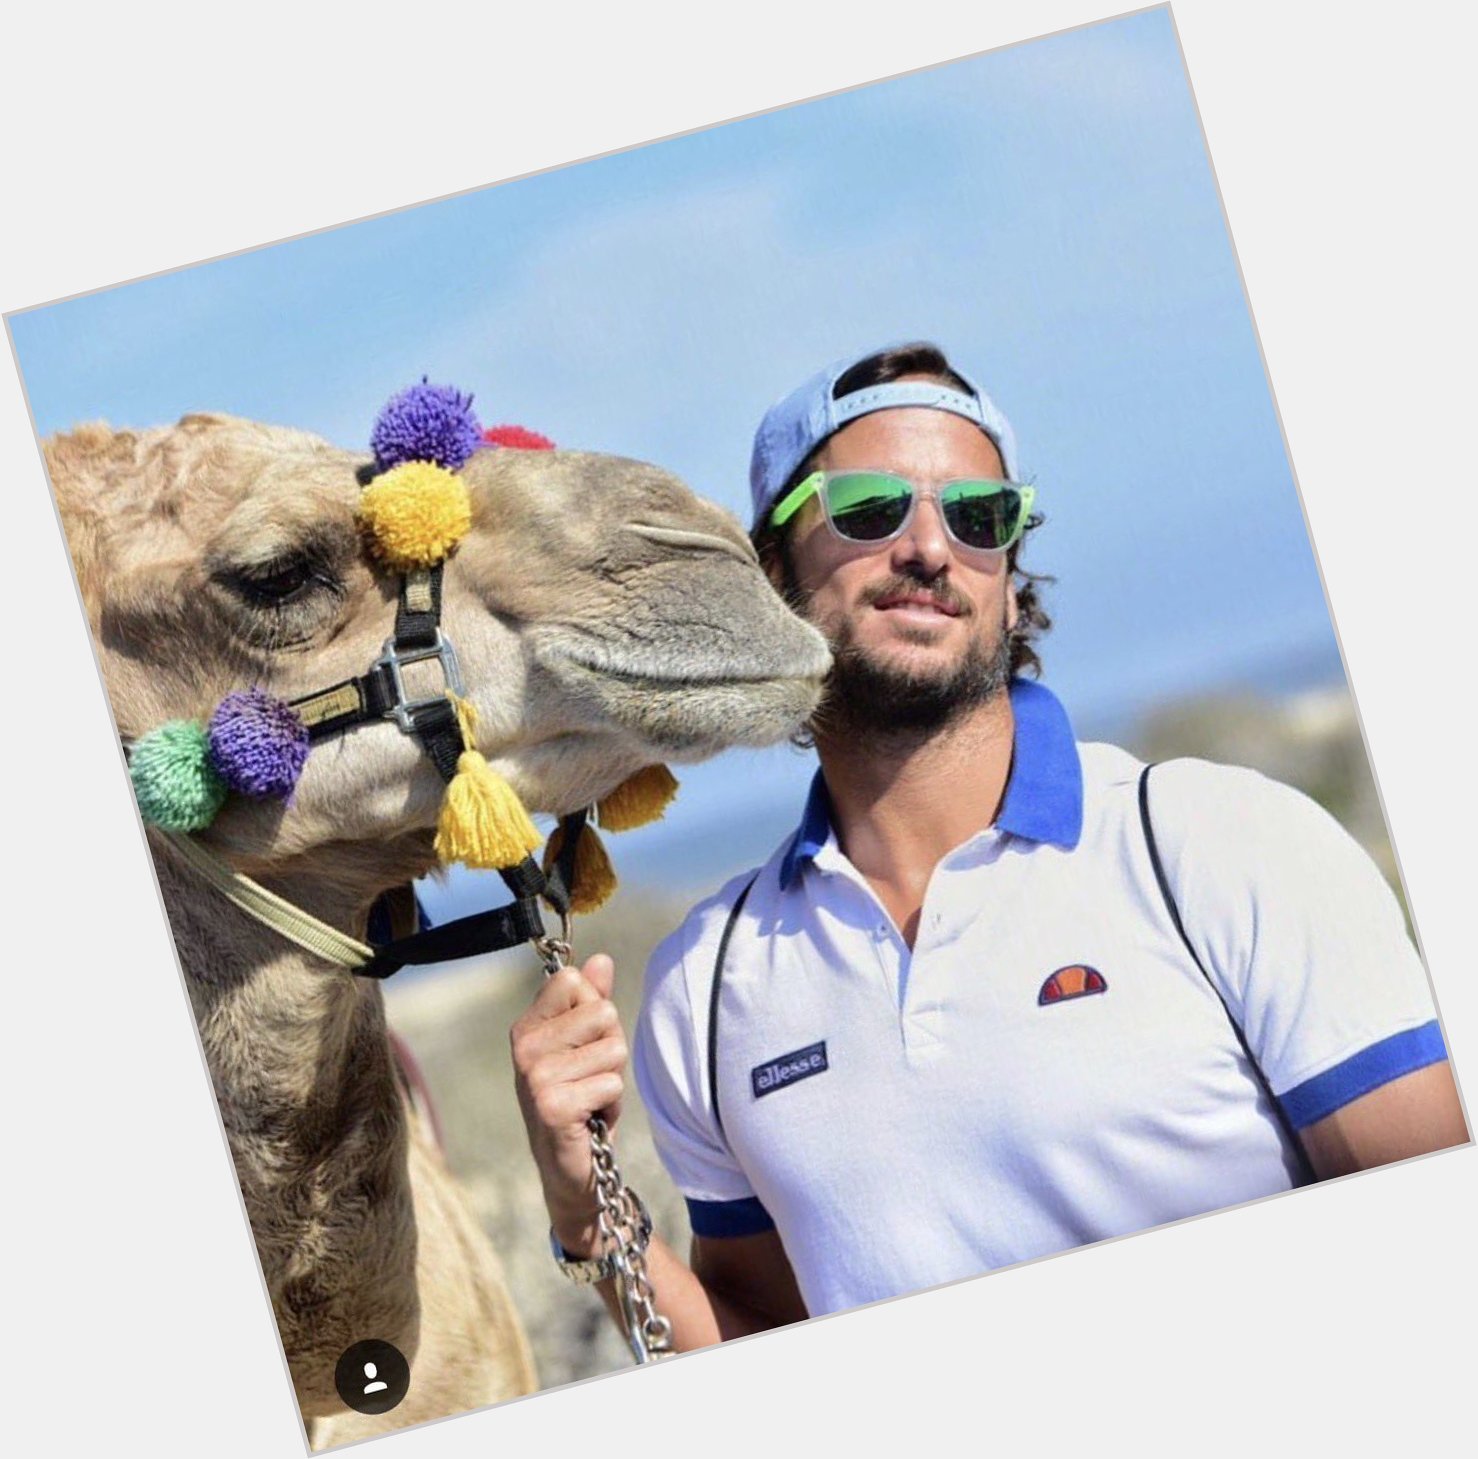  Happy Birthday from me and your camel friend!      